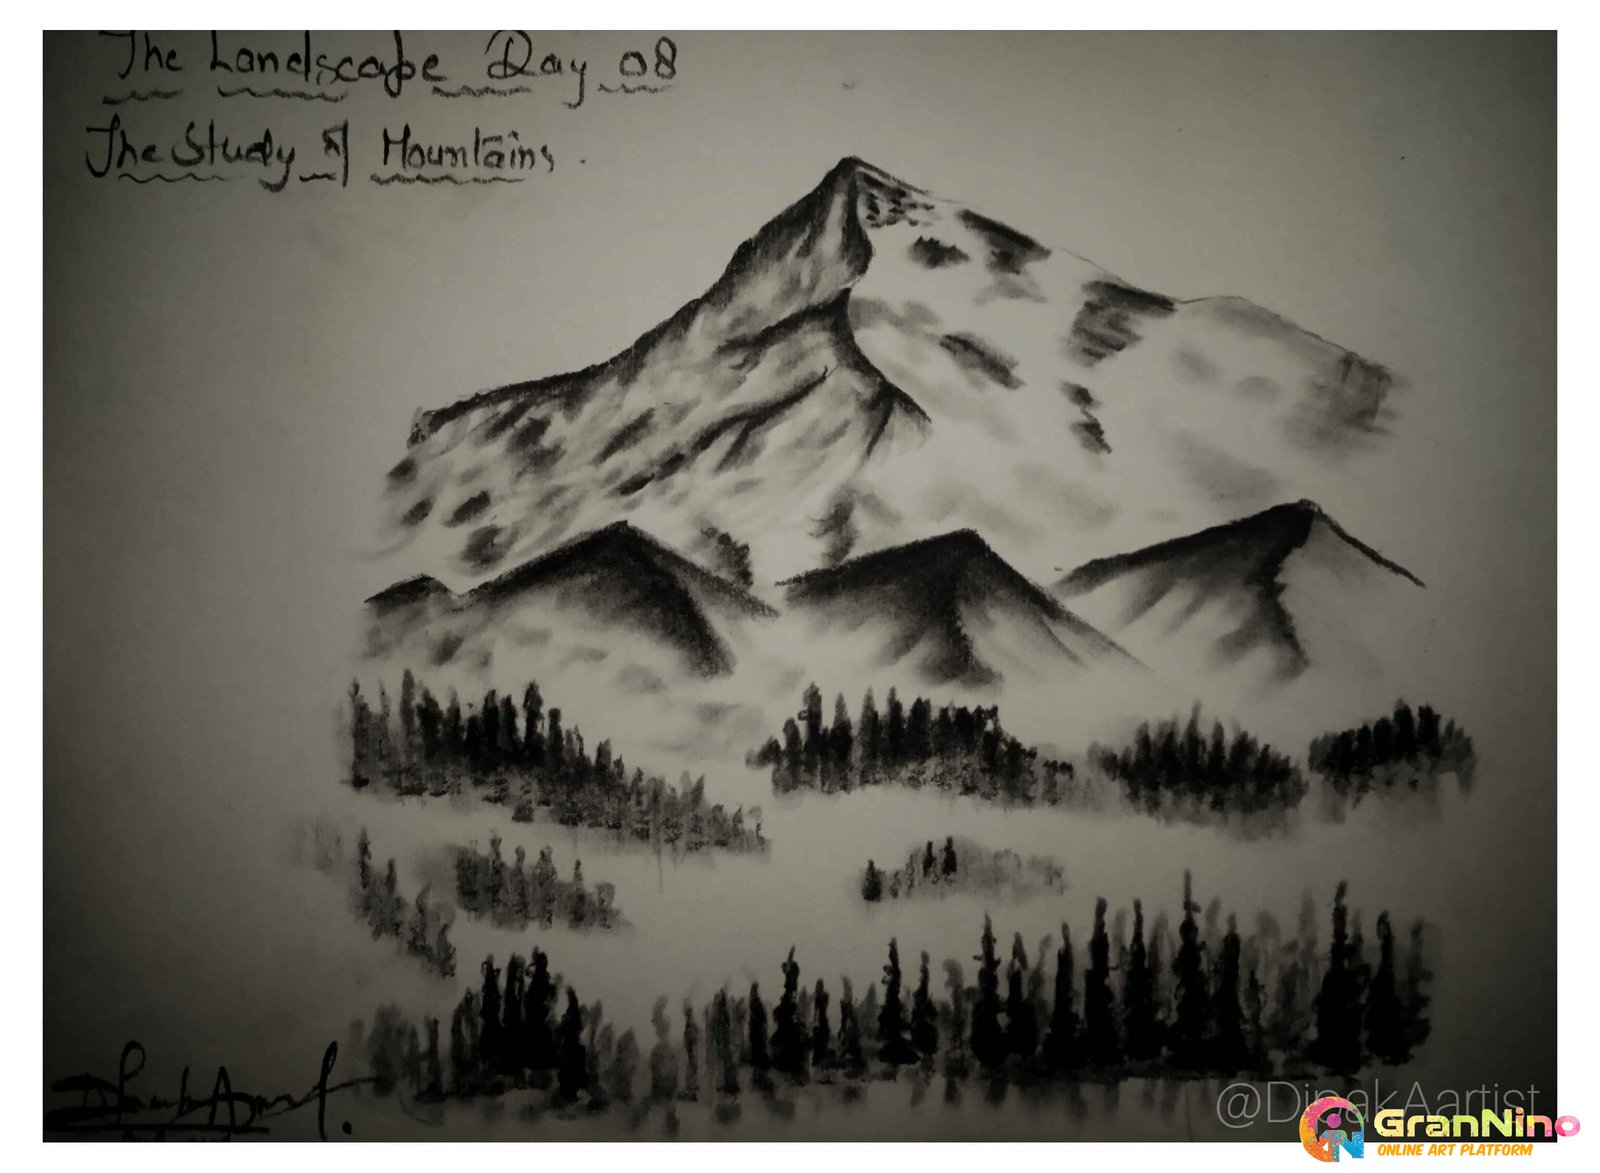 Painting Of The Landscape Day 08 By Dipakaartist In